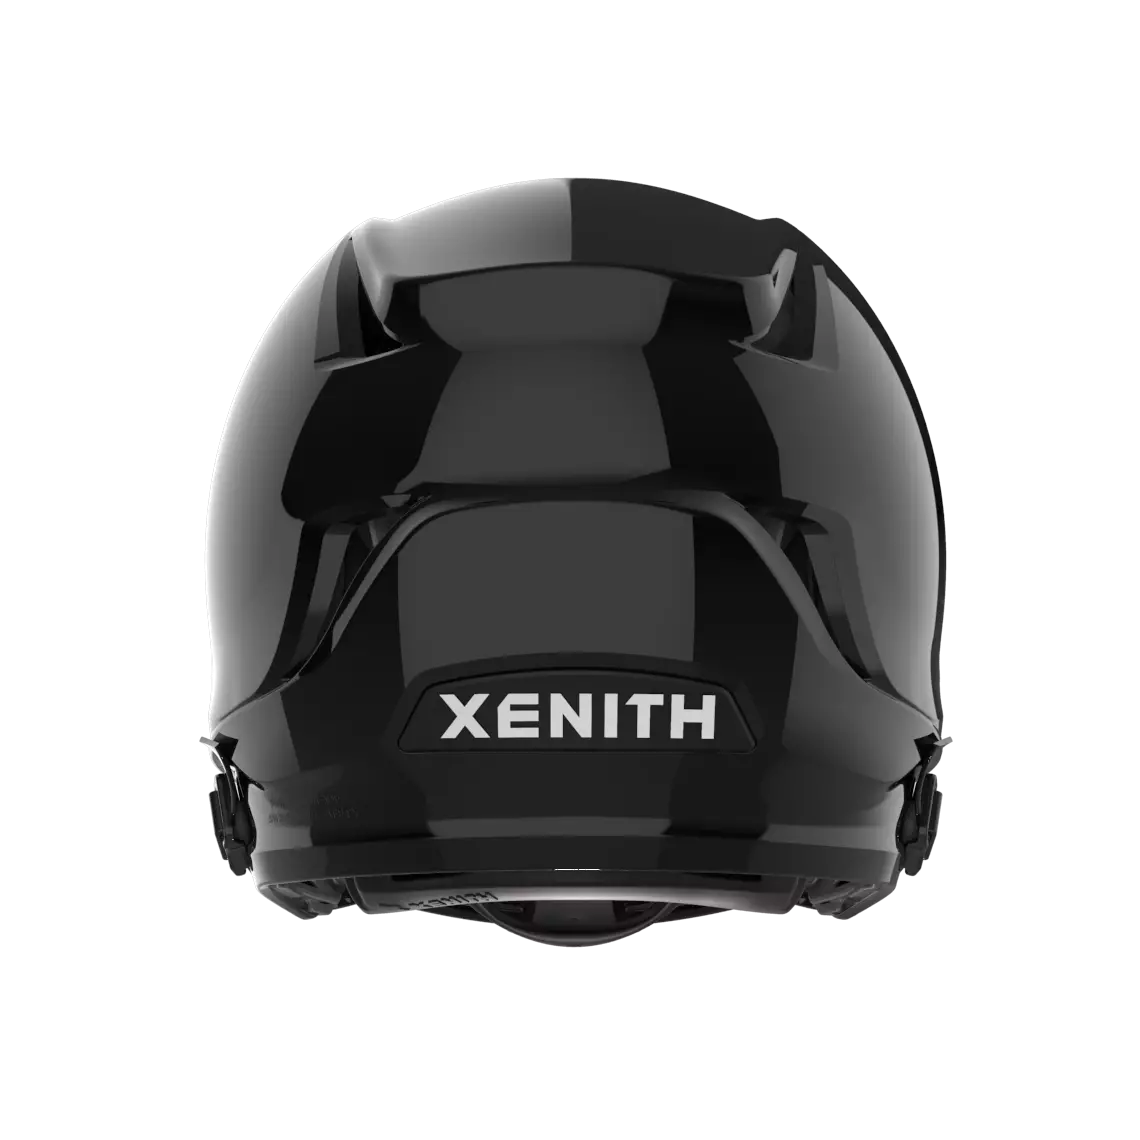 Backside view of Xenith Shadow XR white facemask.